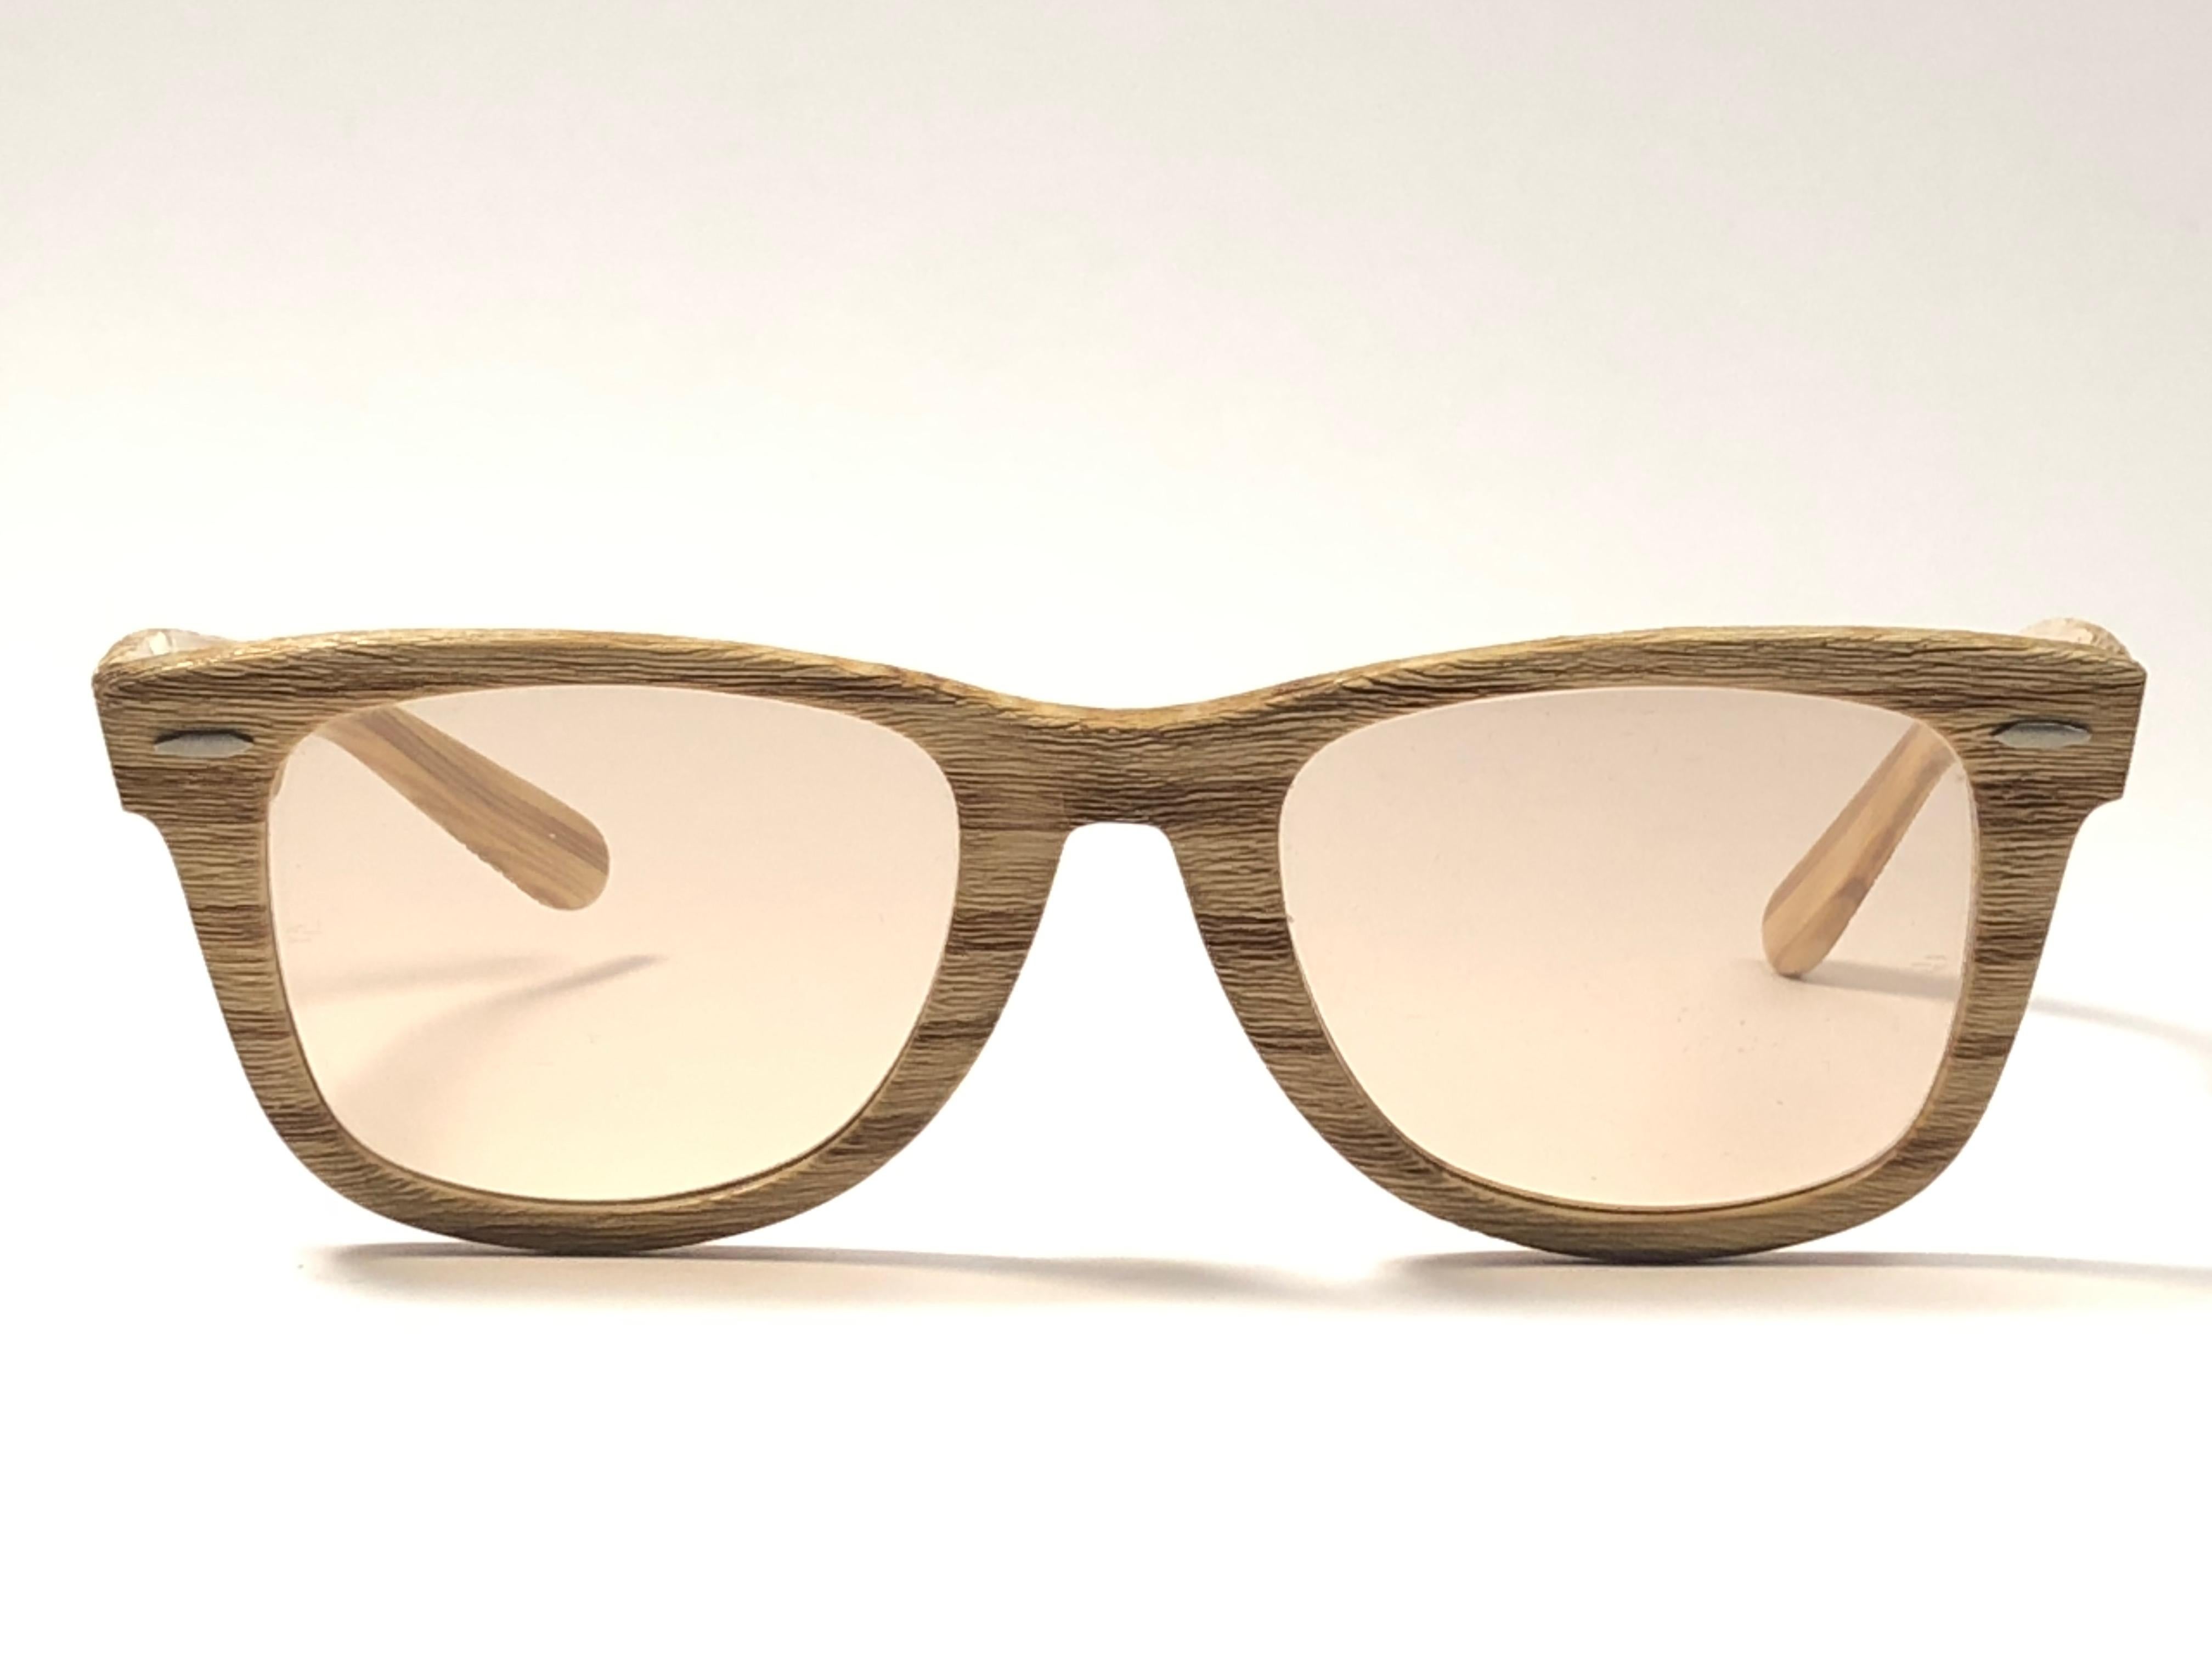 
New and Rare collectors item the ultra rare edition of the classic Wayfarer: The Woodies. 
These were made in 3 colors, from light brown to dark brown. These are the light driftwood edition. Sporting brown changeable lenses 5022, the classic size.